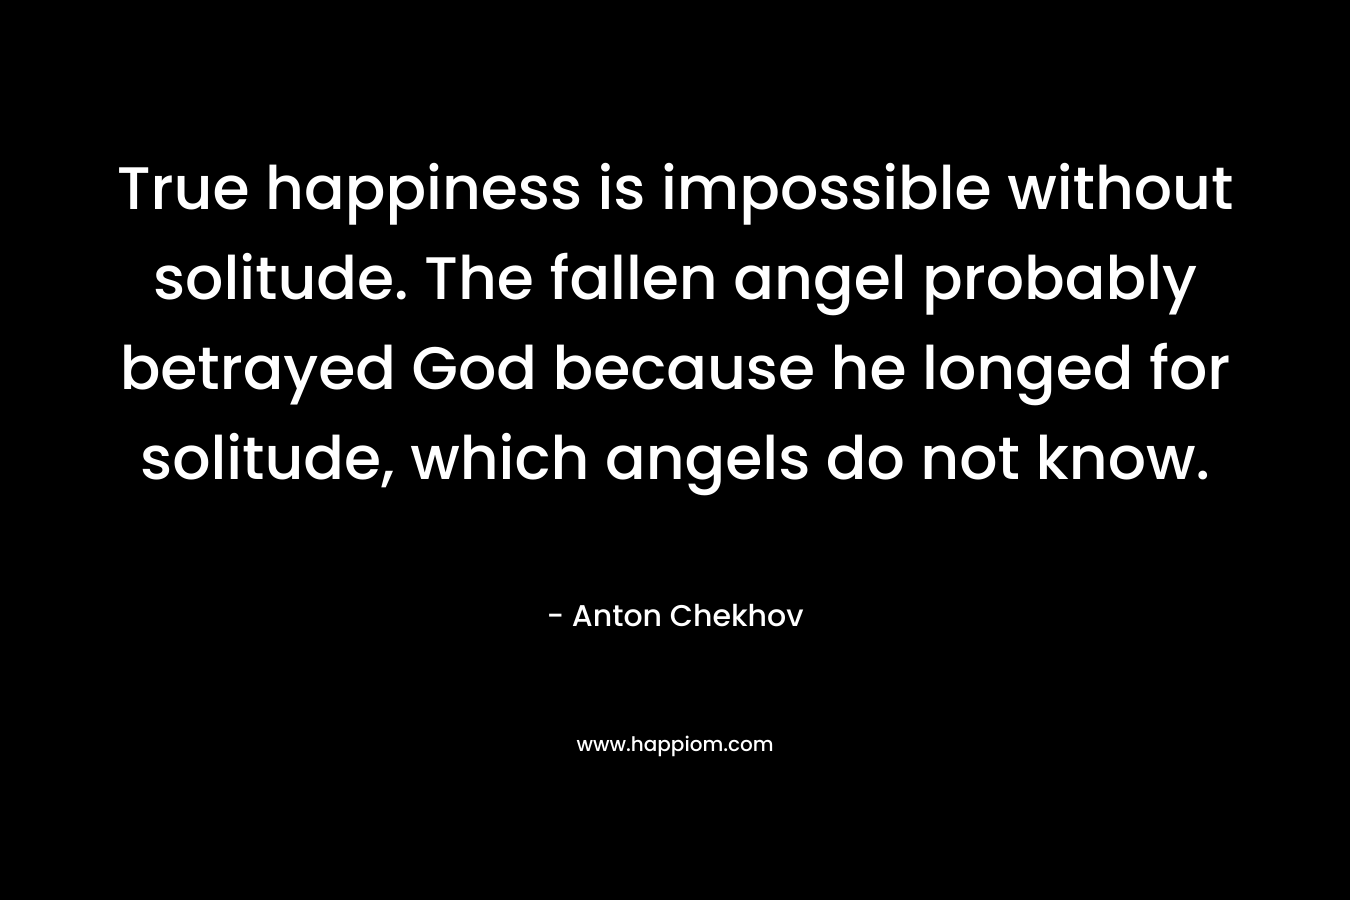 True happiness is impossible without solitude. The fallen angel probably betrayed God because he longed for solitude, which angels do not know. – Anton Chekhov